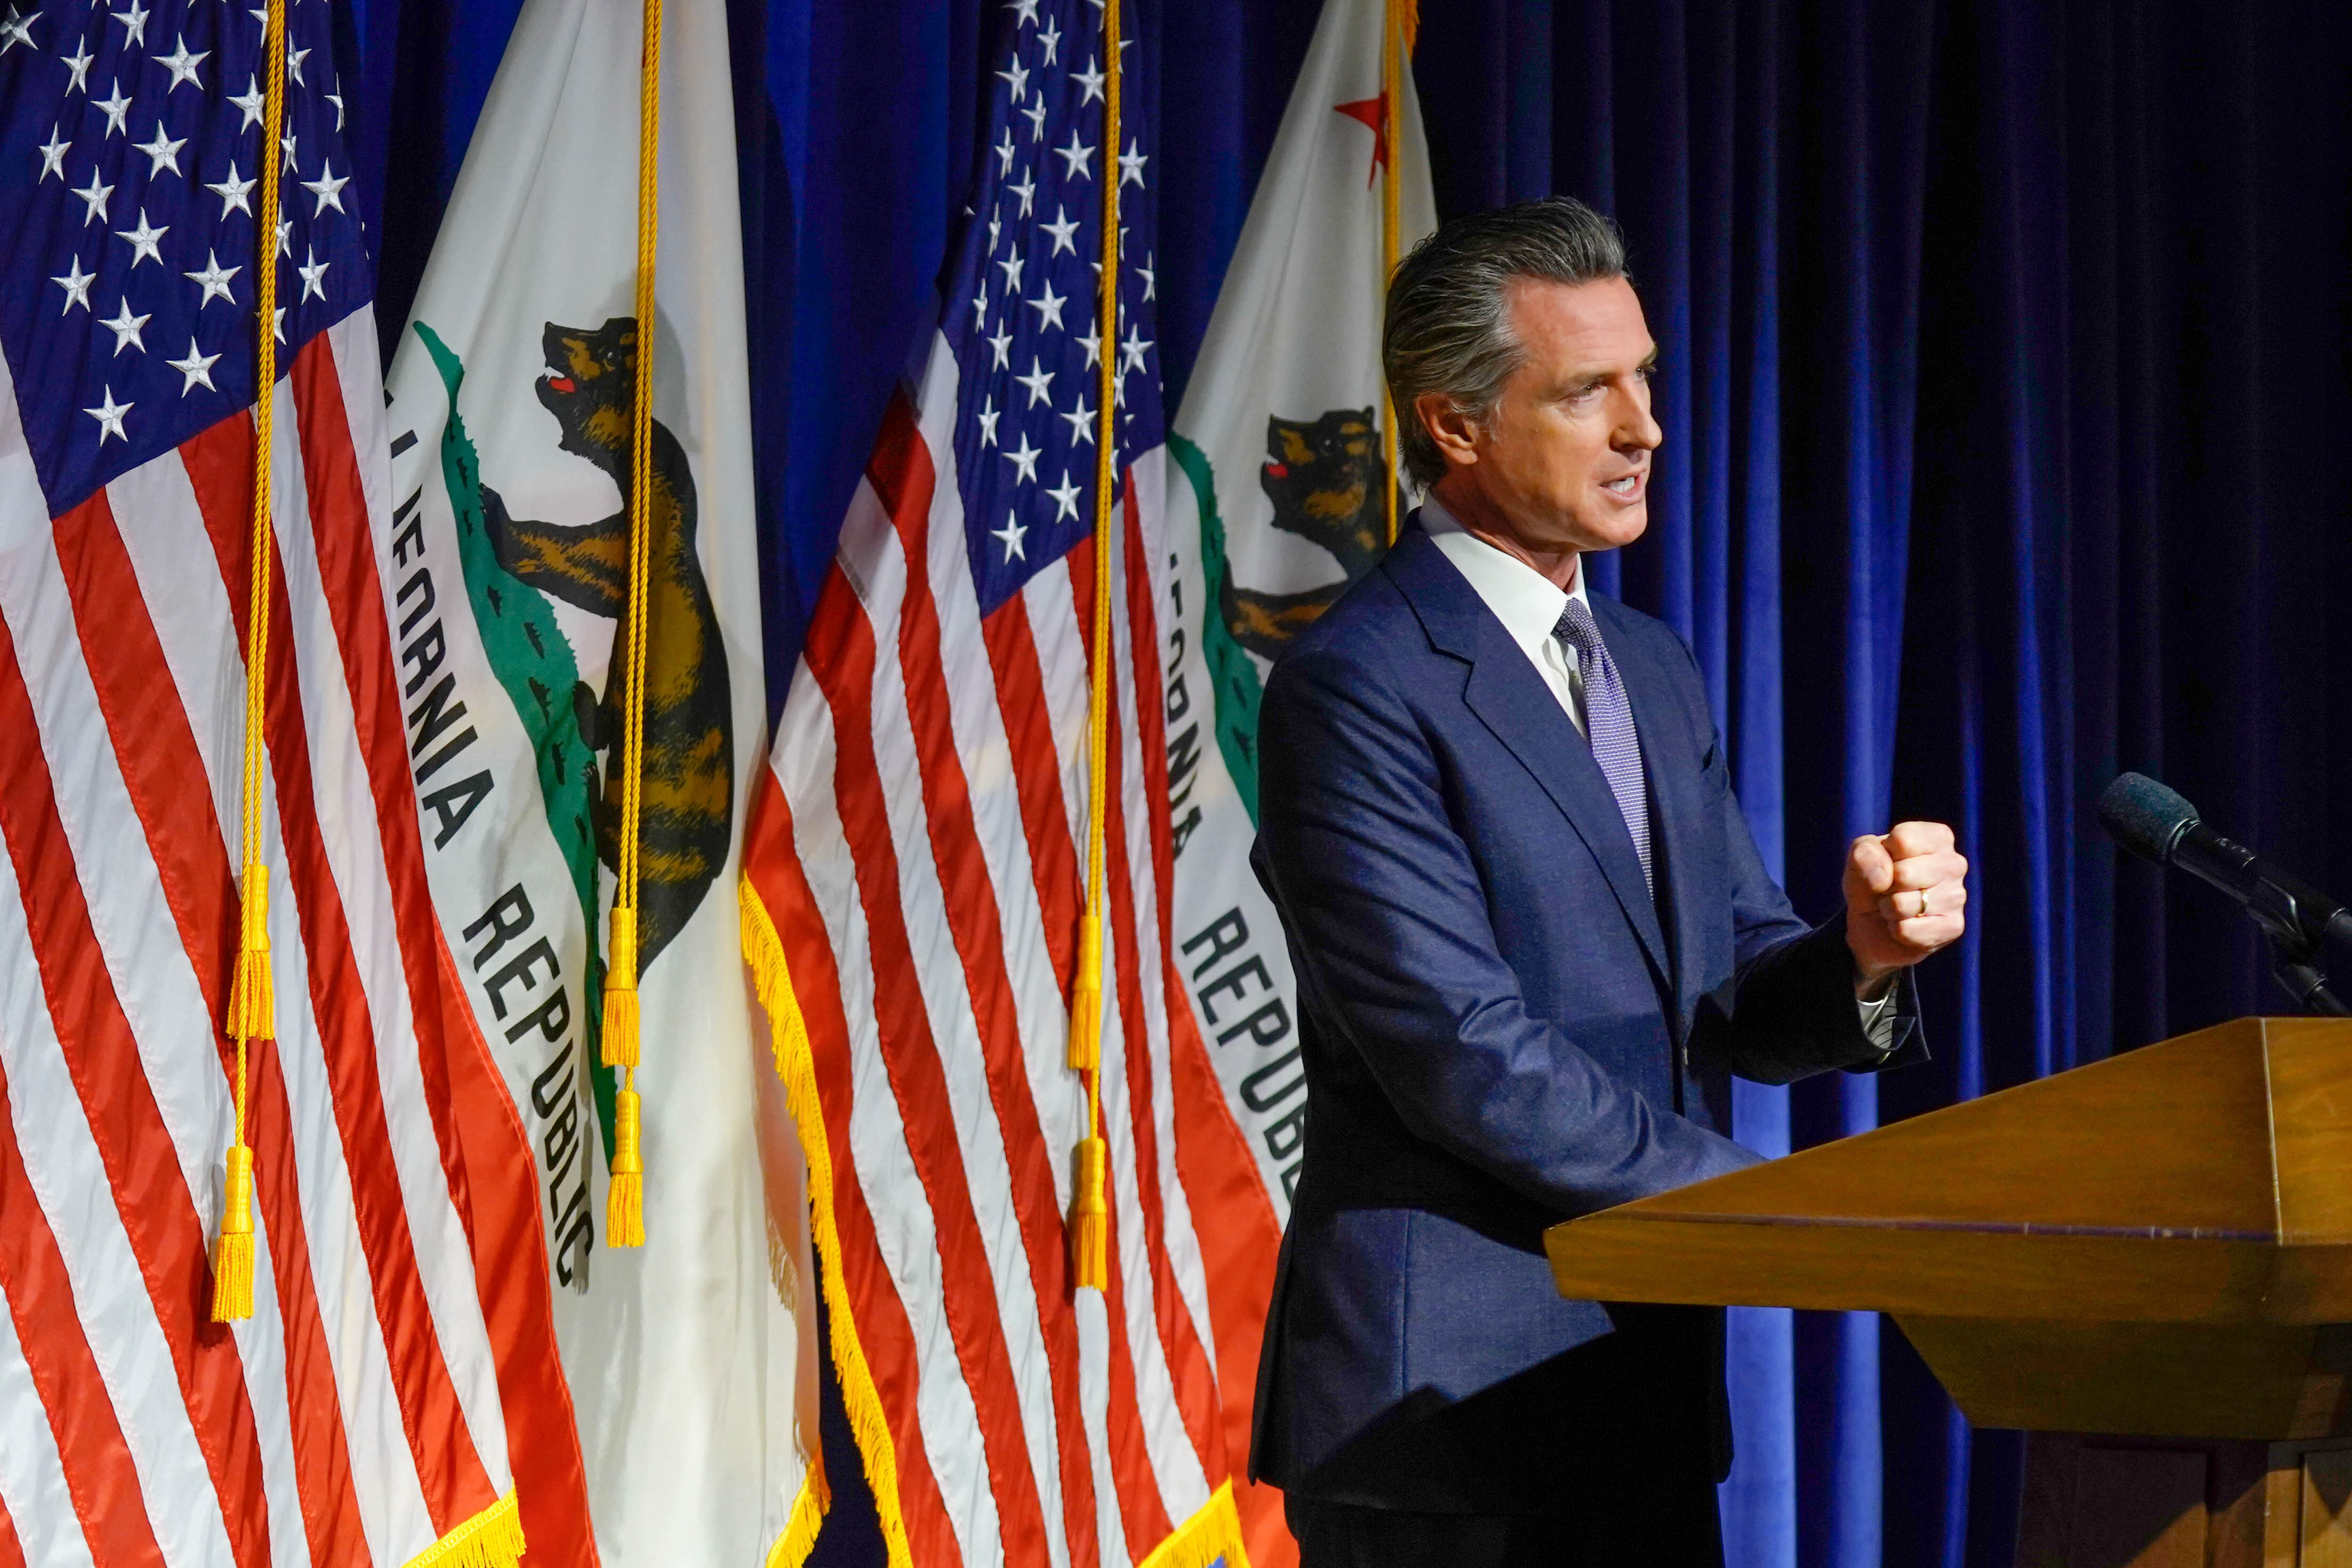 Teachers criticize Newsom's budget proposal, saying it would 'wreak havoc on funding for our schools'